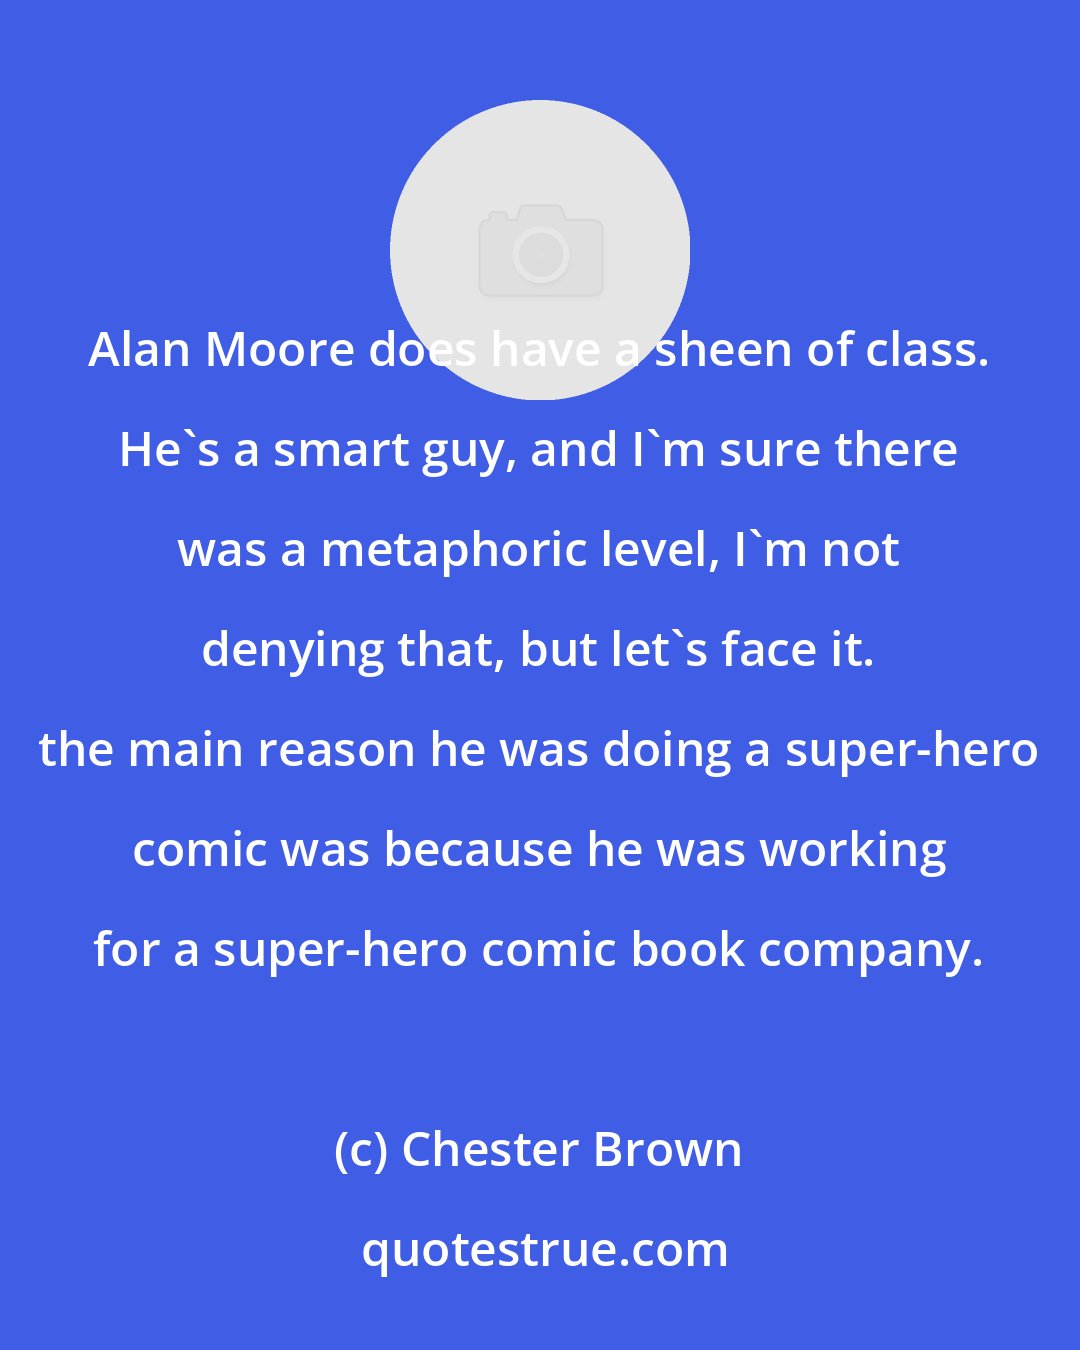 Chester Brown: Alan Moore does have a sheen of class. He's a smart guy, and I'm sure there was a metaphoric level, I'm not denying that, but let's face it. the main reason he was doing a super-hero comic was because he was working for a super-hero comic book company.